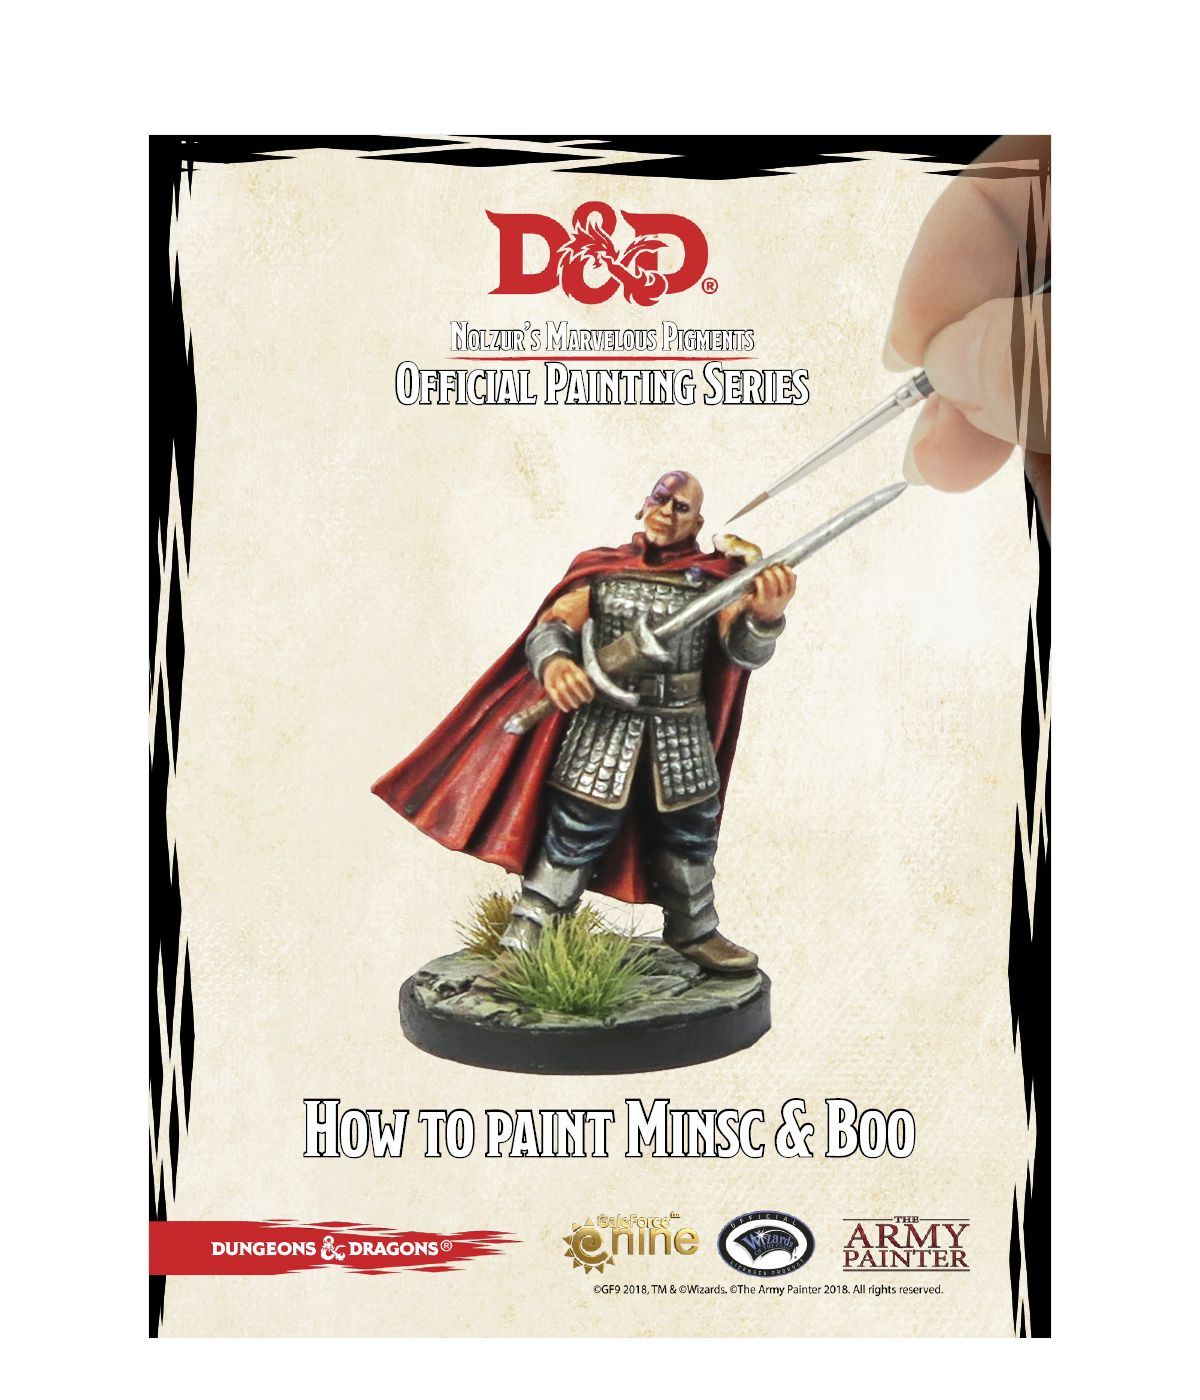 D&D - How to paint Minsc & Boo by The Army Painter - Issuu